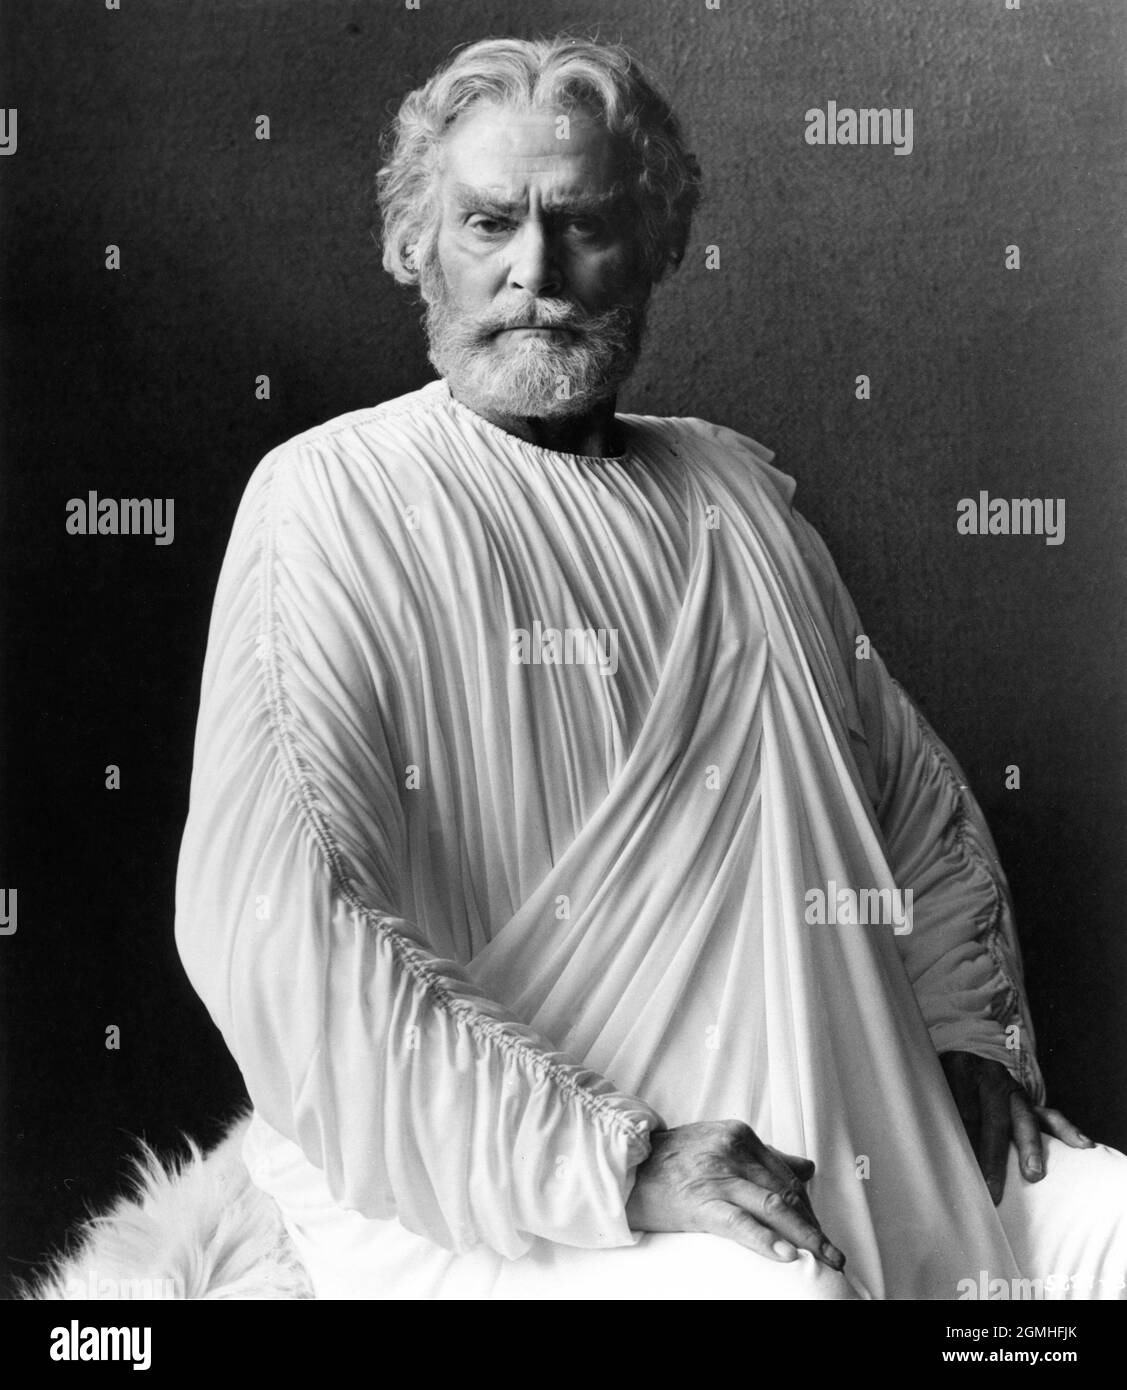 LAURENCE OLIVIER Portrait as Zeus in CLASH OF THE TITANS 1981 director DESMOND DAVIS written by Beverley Cross costume design Emma Porteous creator of special visual effects (Dynamation) Ray Harryhausen music Laurence Rosenthal producers Charles H. Schneer and Ray Harryhausen Charles H. Schneer Productions / Peerford Ltd. / distribution Cinema International Corporation (CIC)  (UK) Metro Goldwyn Mayer (USA) Stock Photo